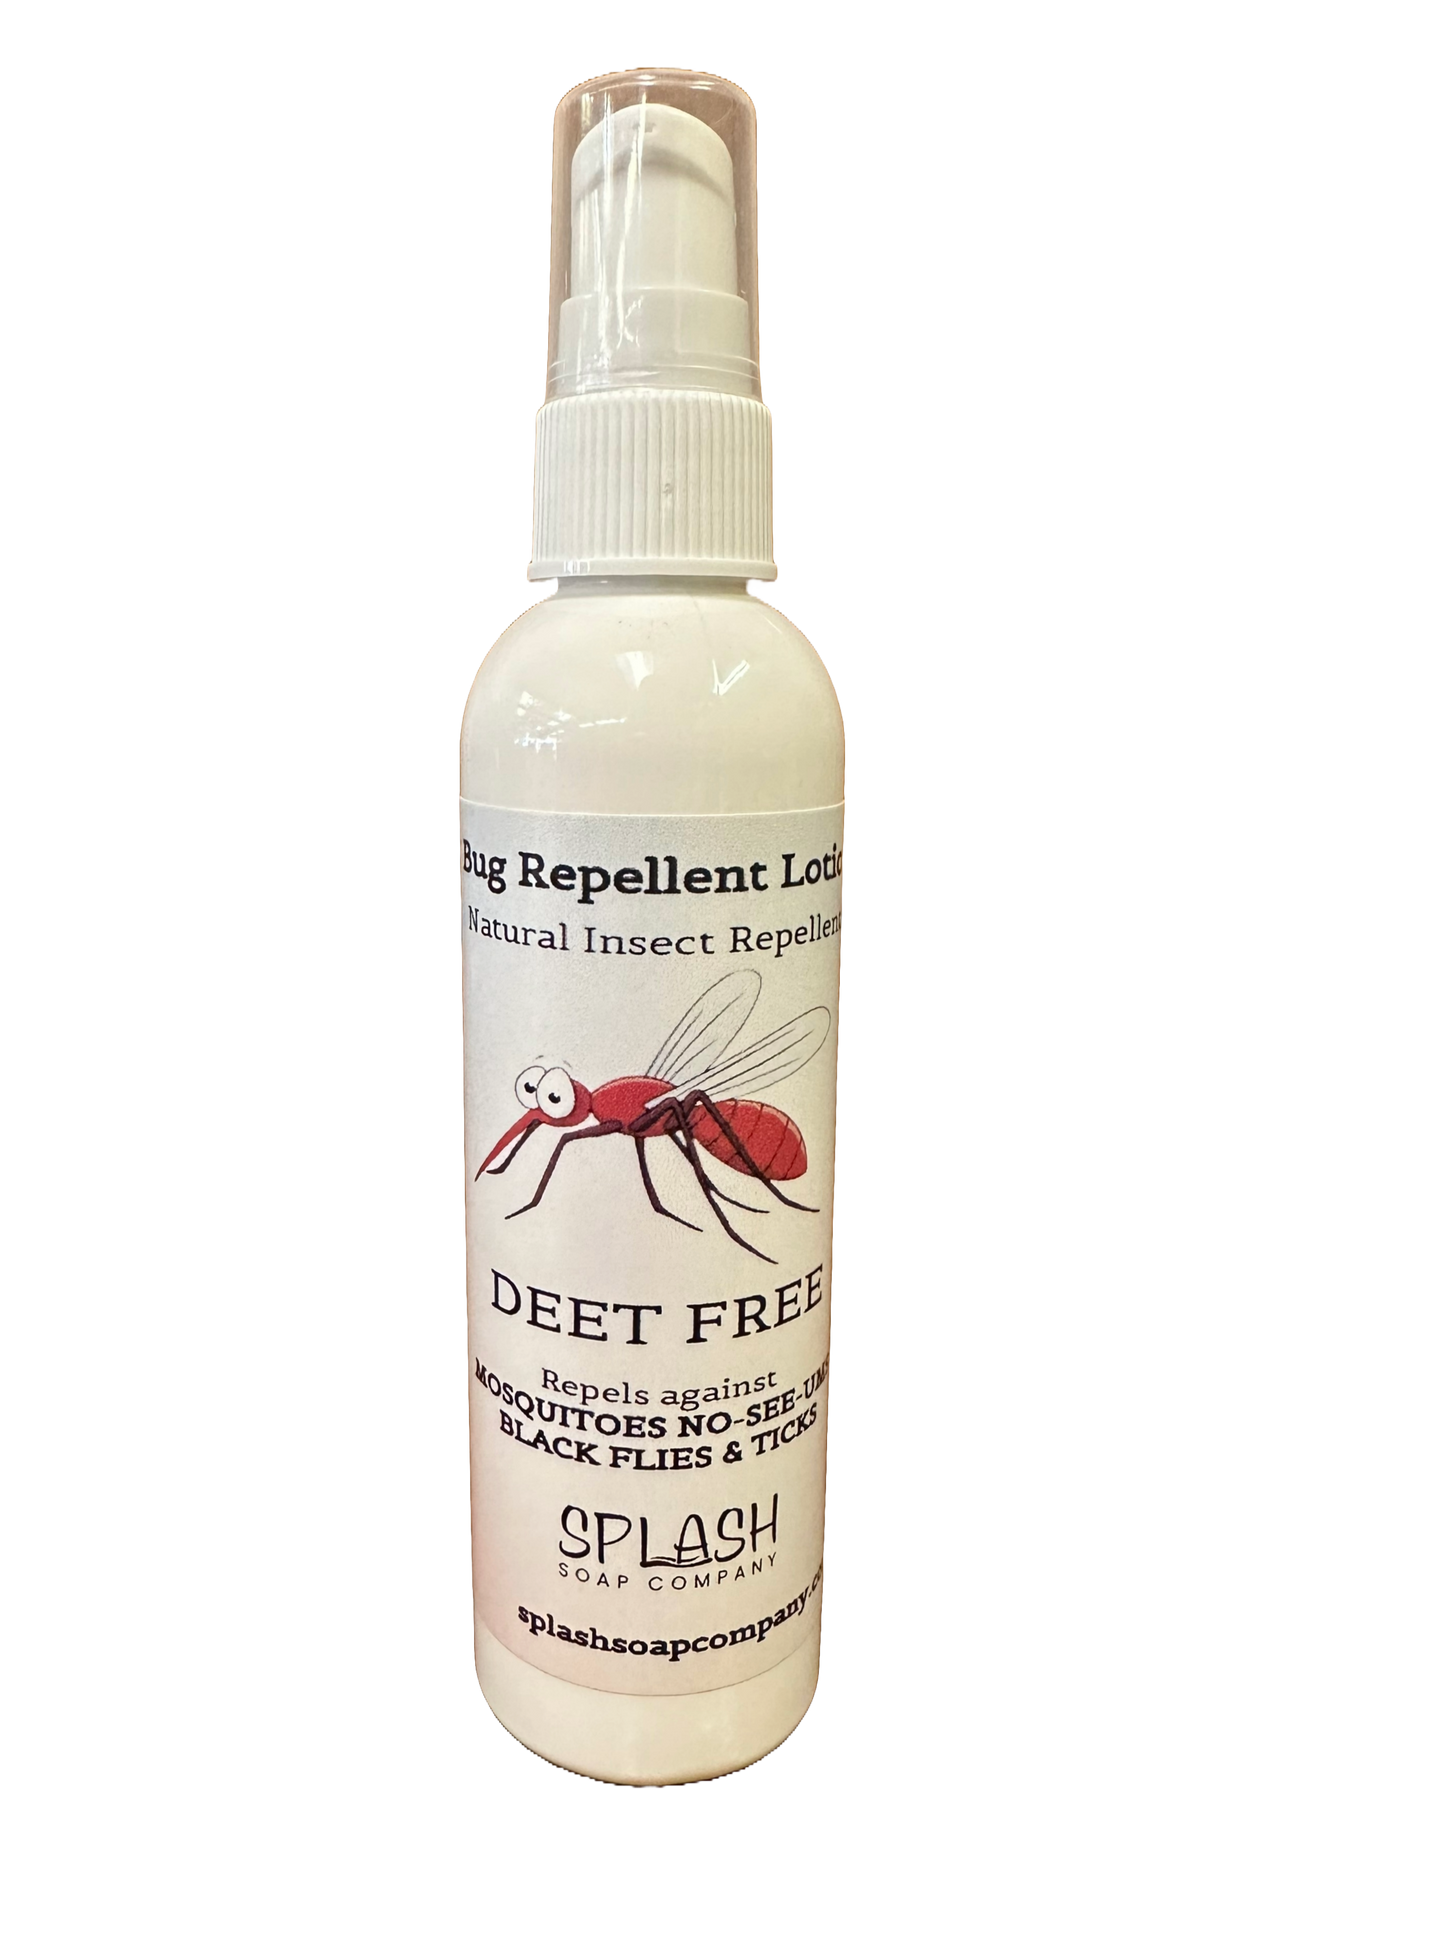 Bug Repellent Lotion